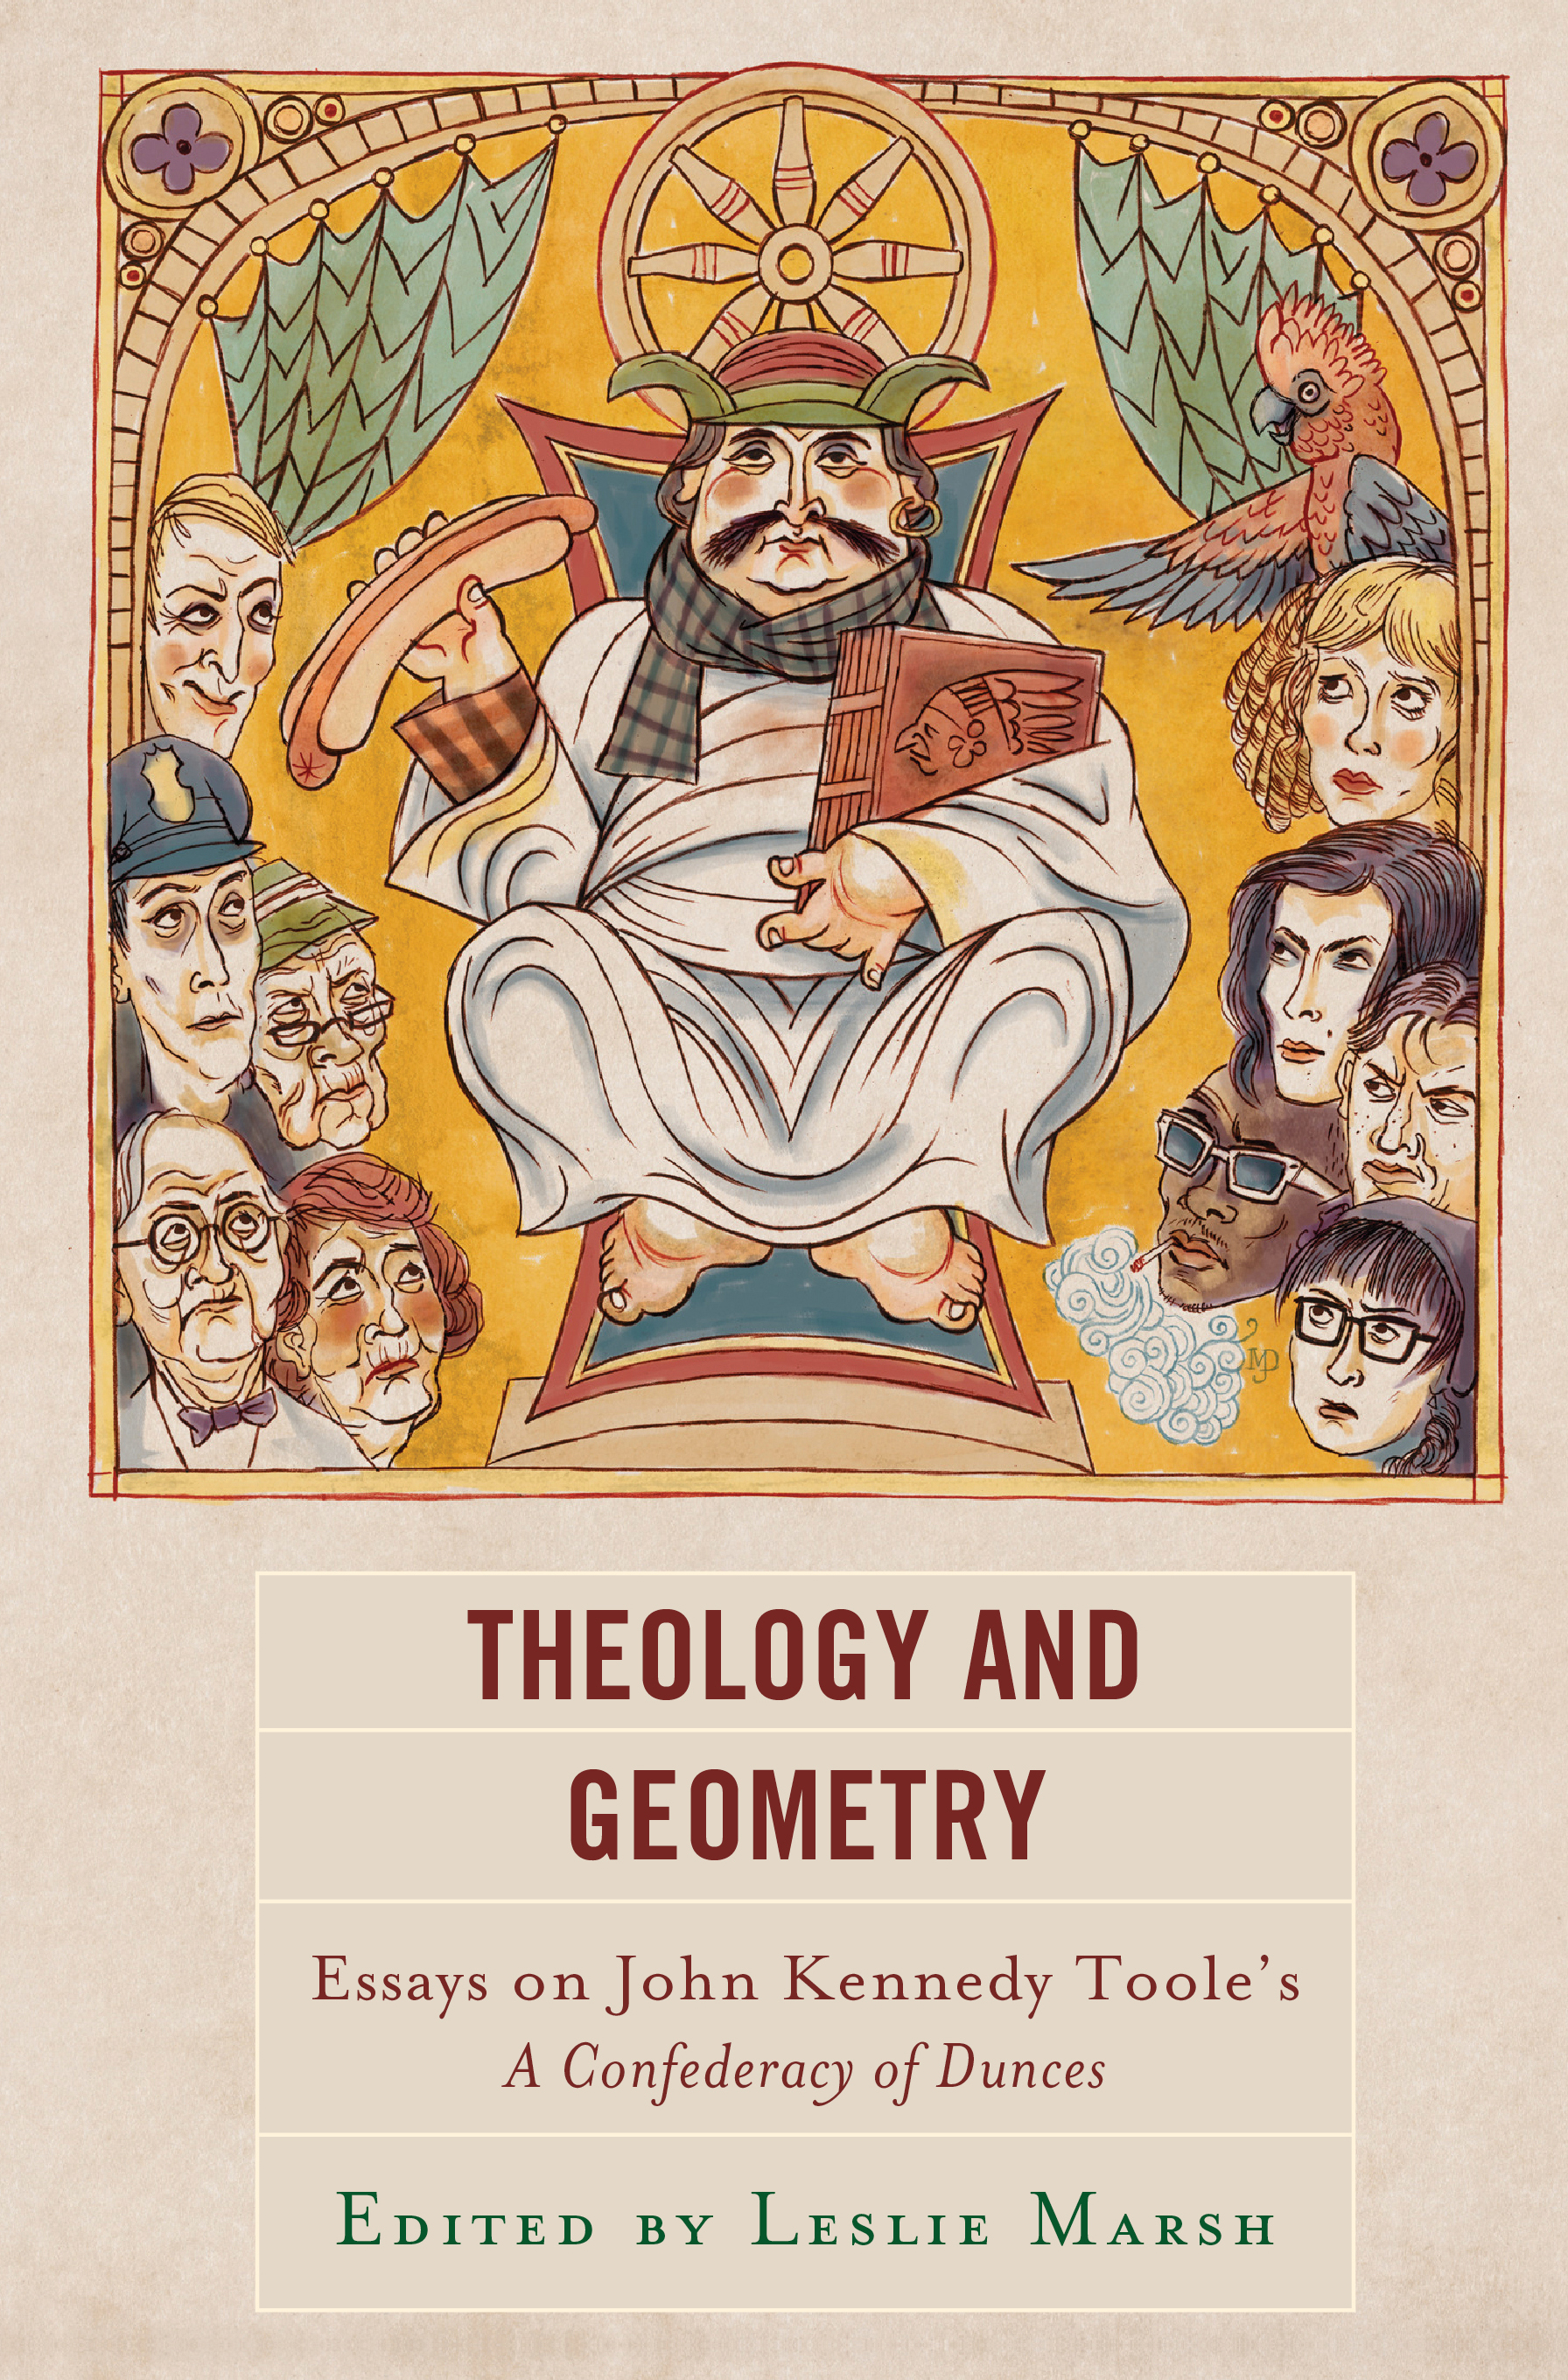 Theology and Geometry: Essays on John Kennedy Toole’s A Confederacy of Dunces